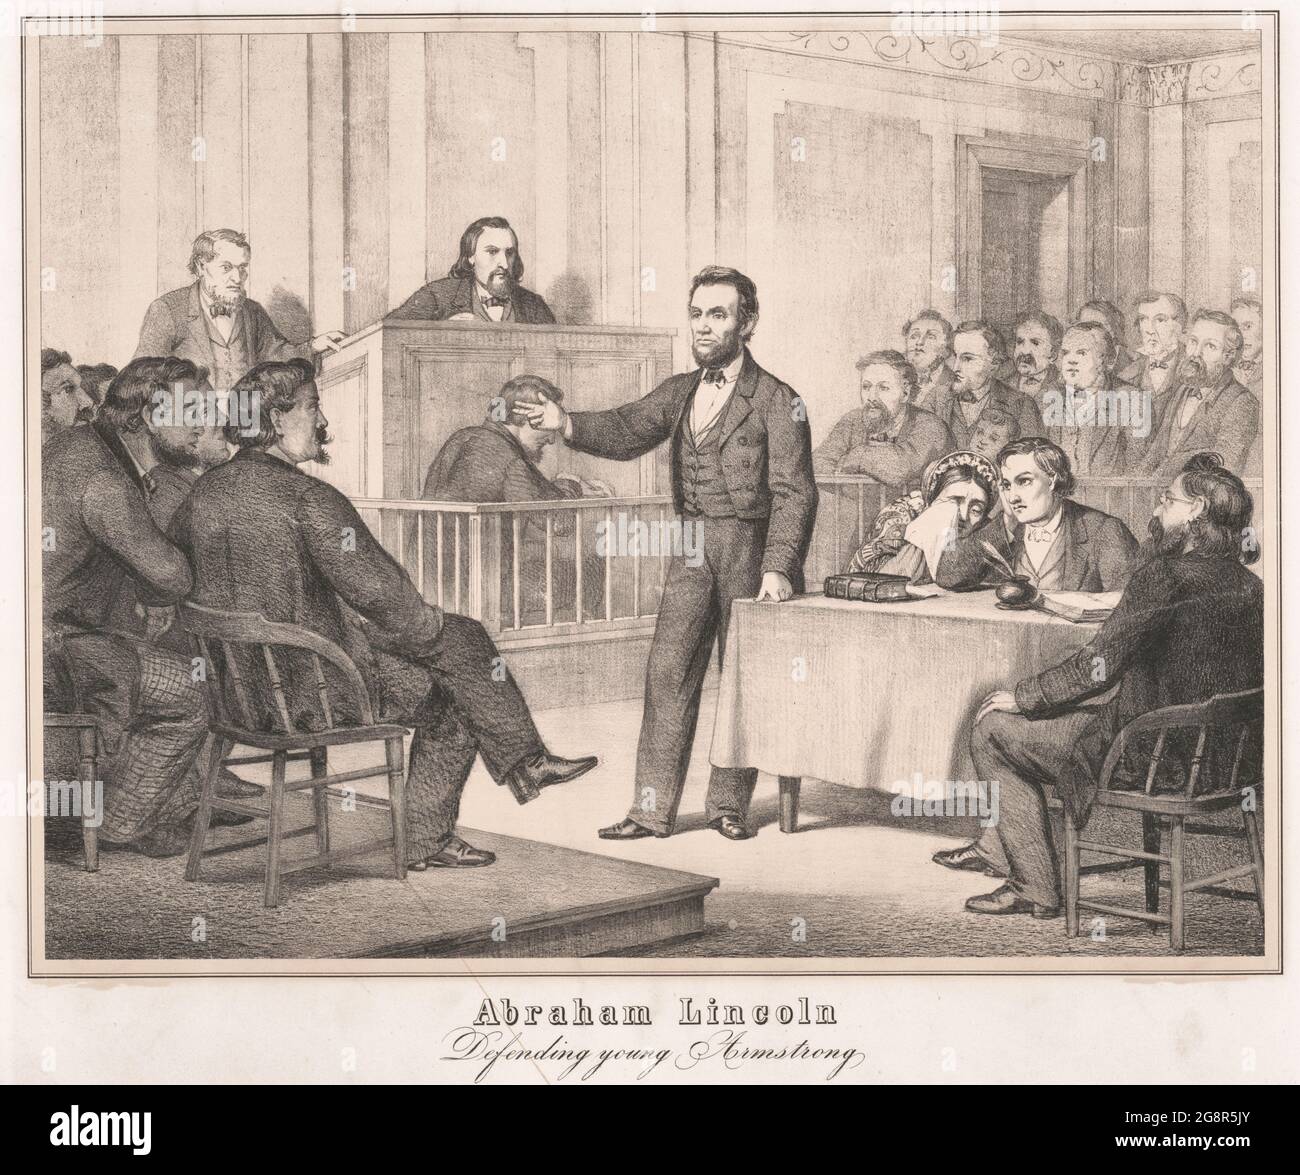 Abraham Lincoln. Defending young Armstrong - Abraham Lincoln in court during a trial in which he defended William 'Duff' Armstrong who had been charged with the murder of James Preston Metzker Stock Photo